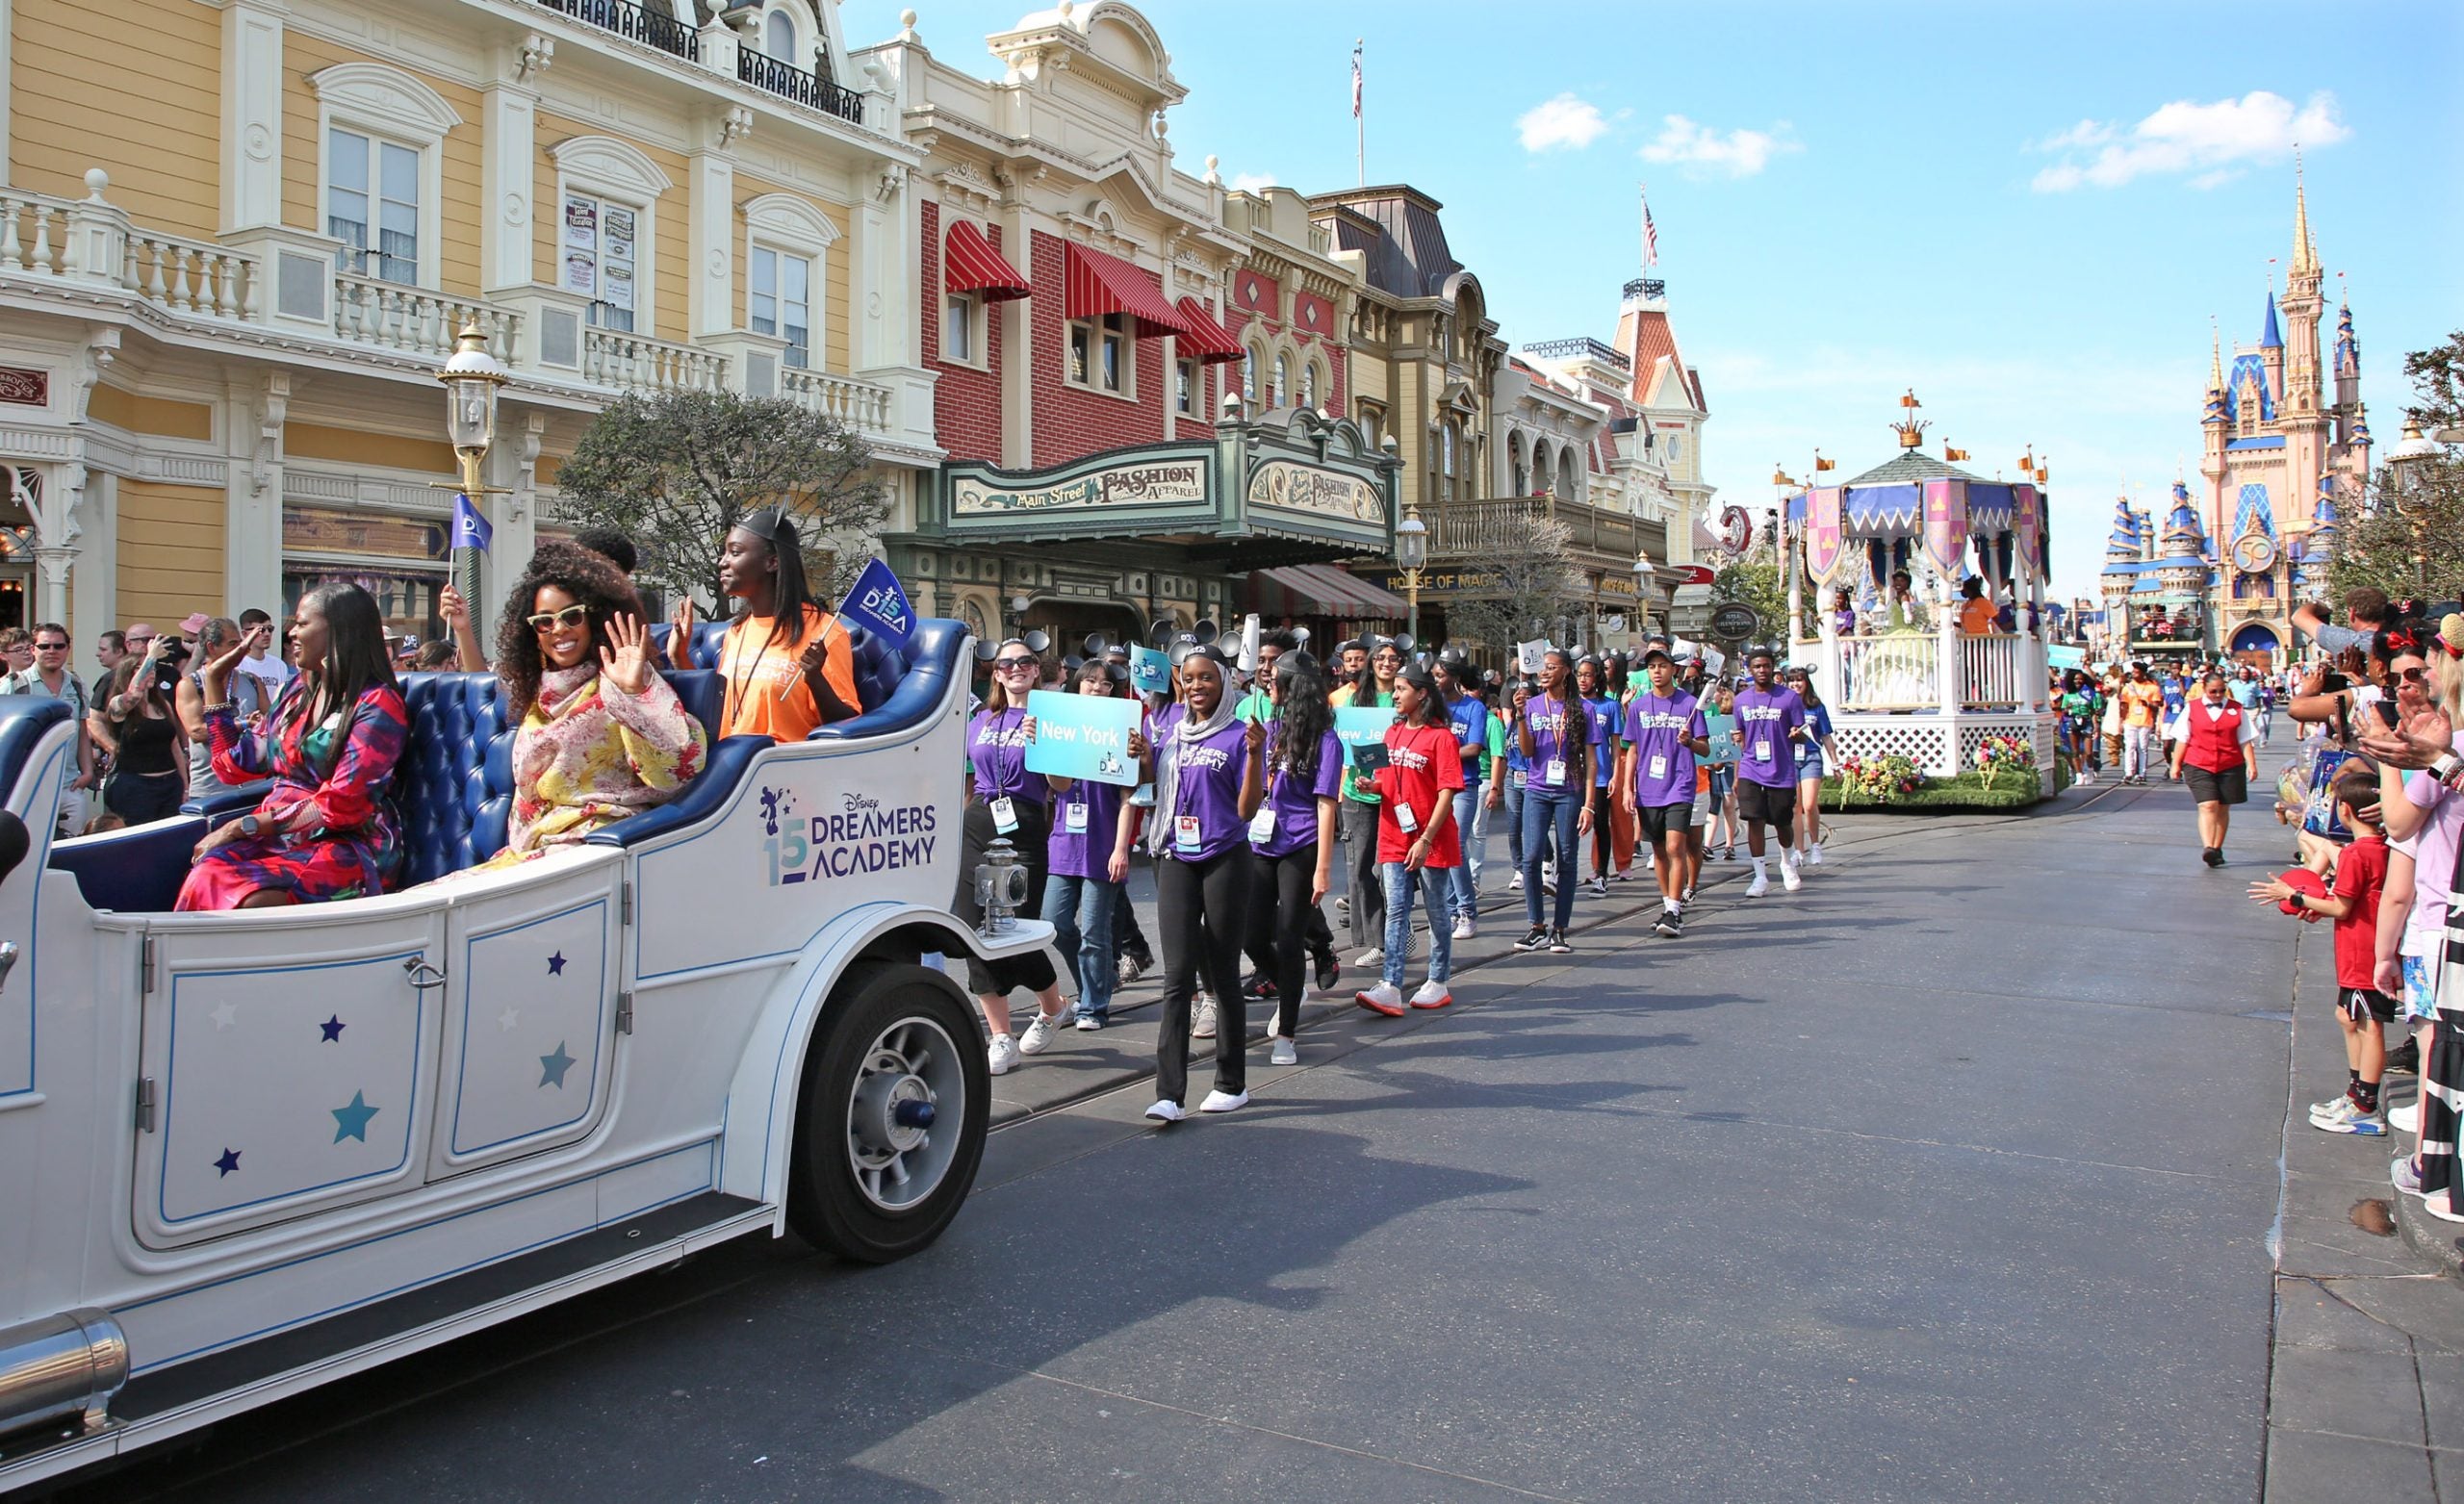 Kelly Rowland, Mickey Mouse The Drum Major And Fireworks: Inside Disney Dreamers Academy Day 1